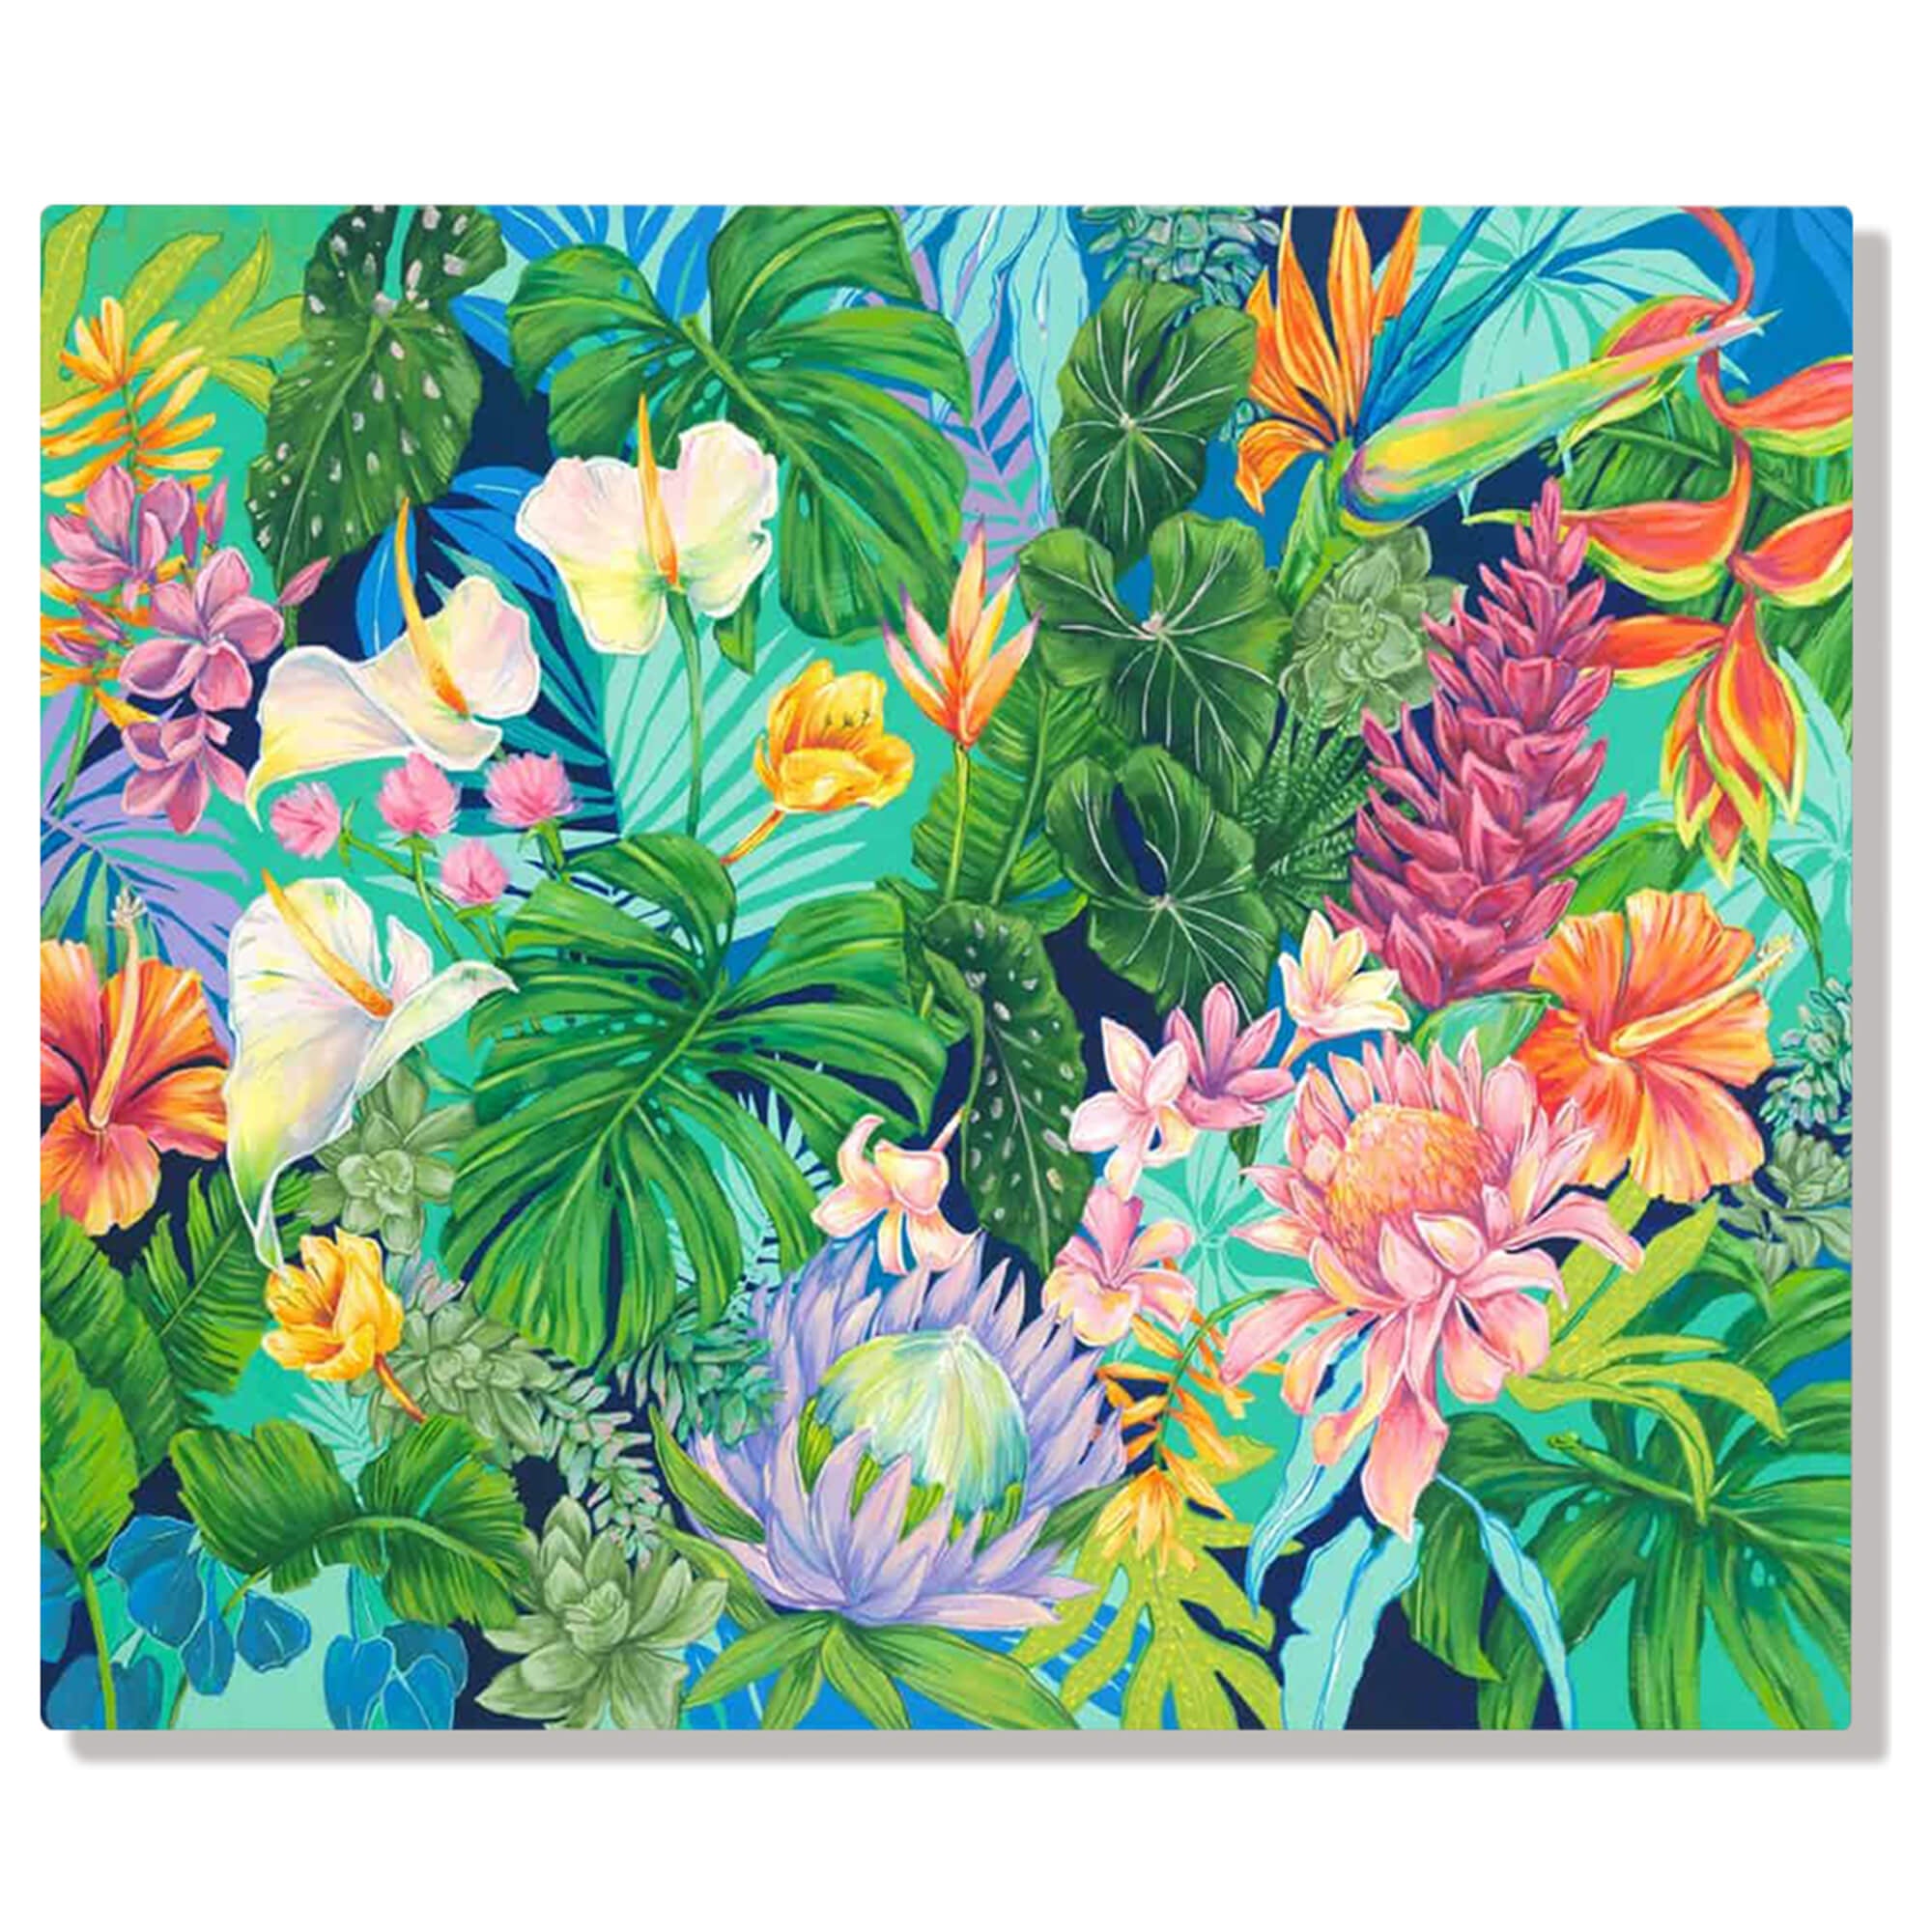 A metal art print featuring  a colorful art collage of tropical flowers and flora by Hawaii artist Lauren Roth